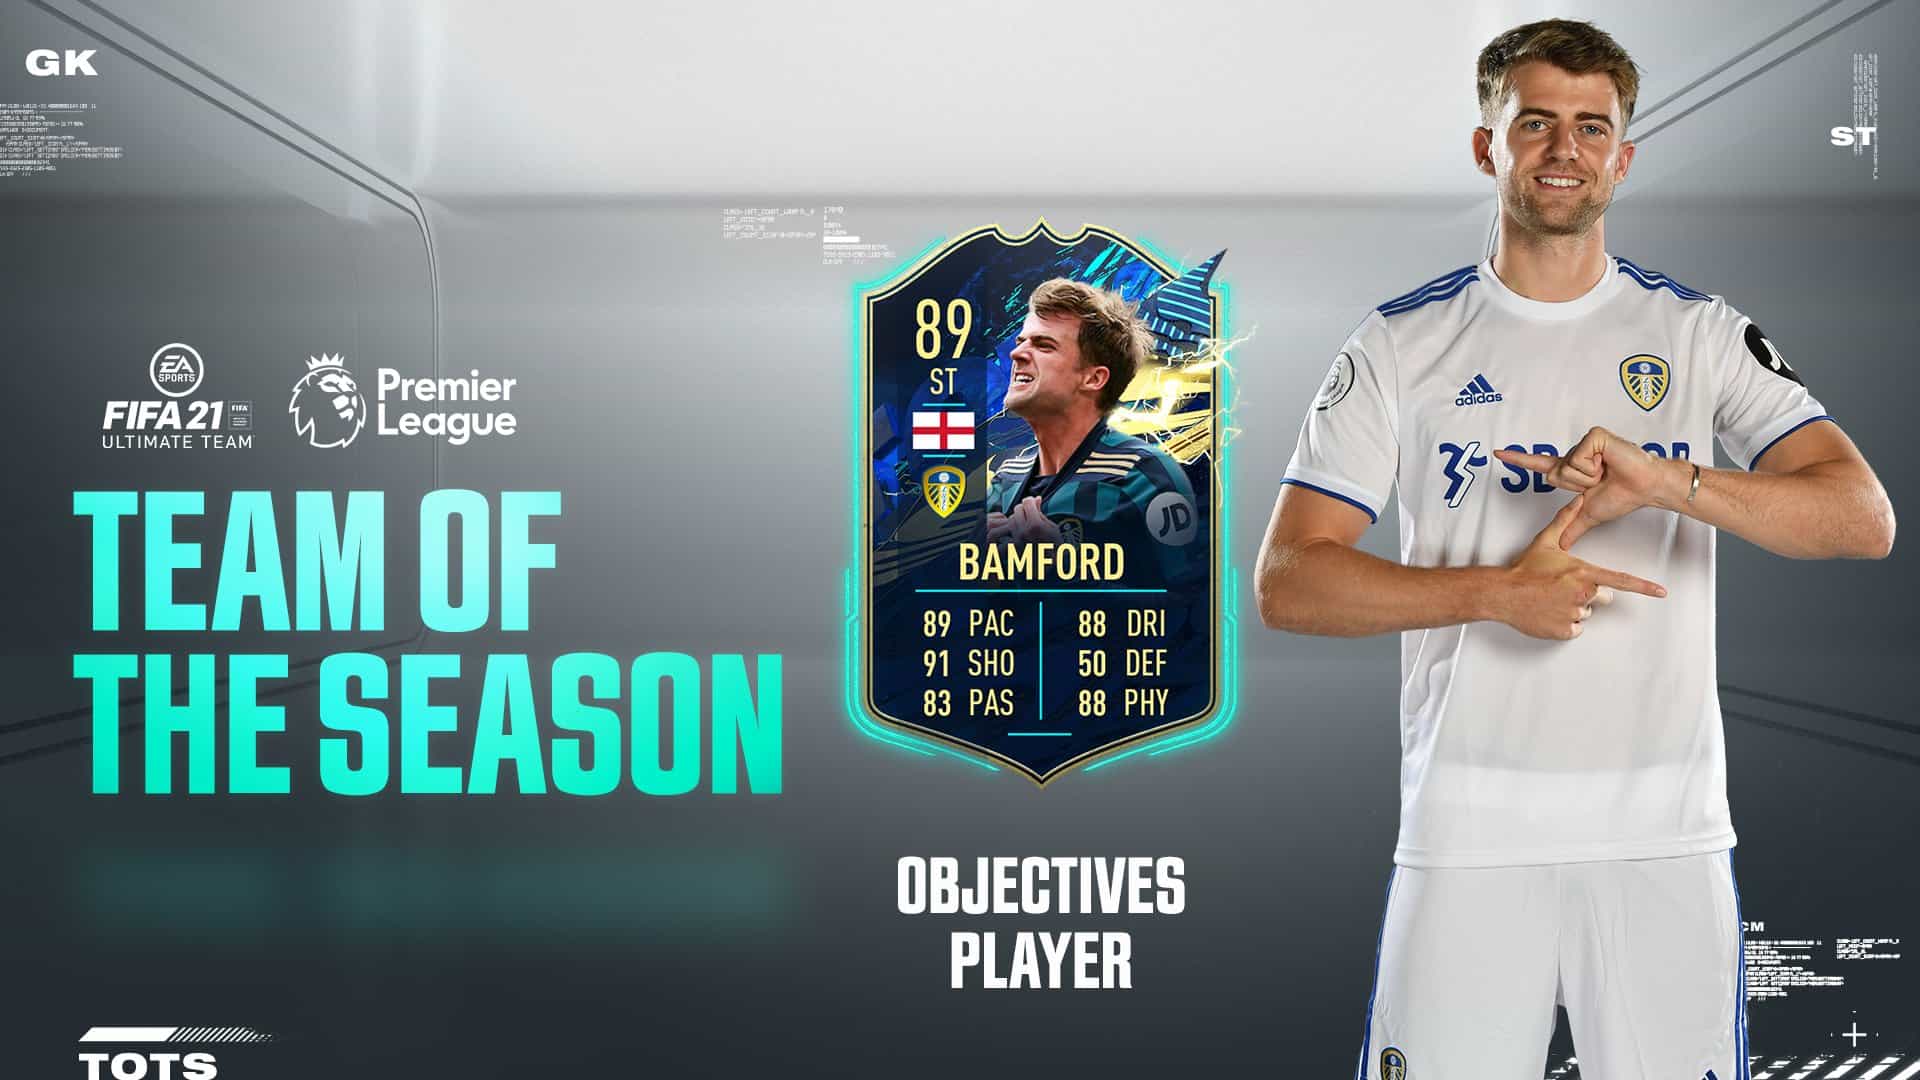 Fifa 21 Patrick Bamford Tots Card In Season Objectives How To Complete Requirements Fifaultimateteam It Uk